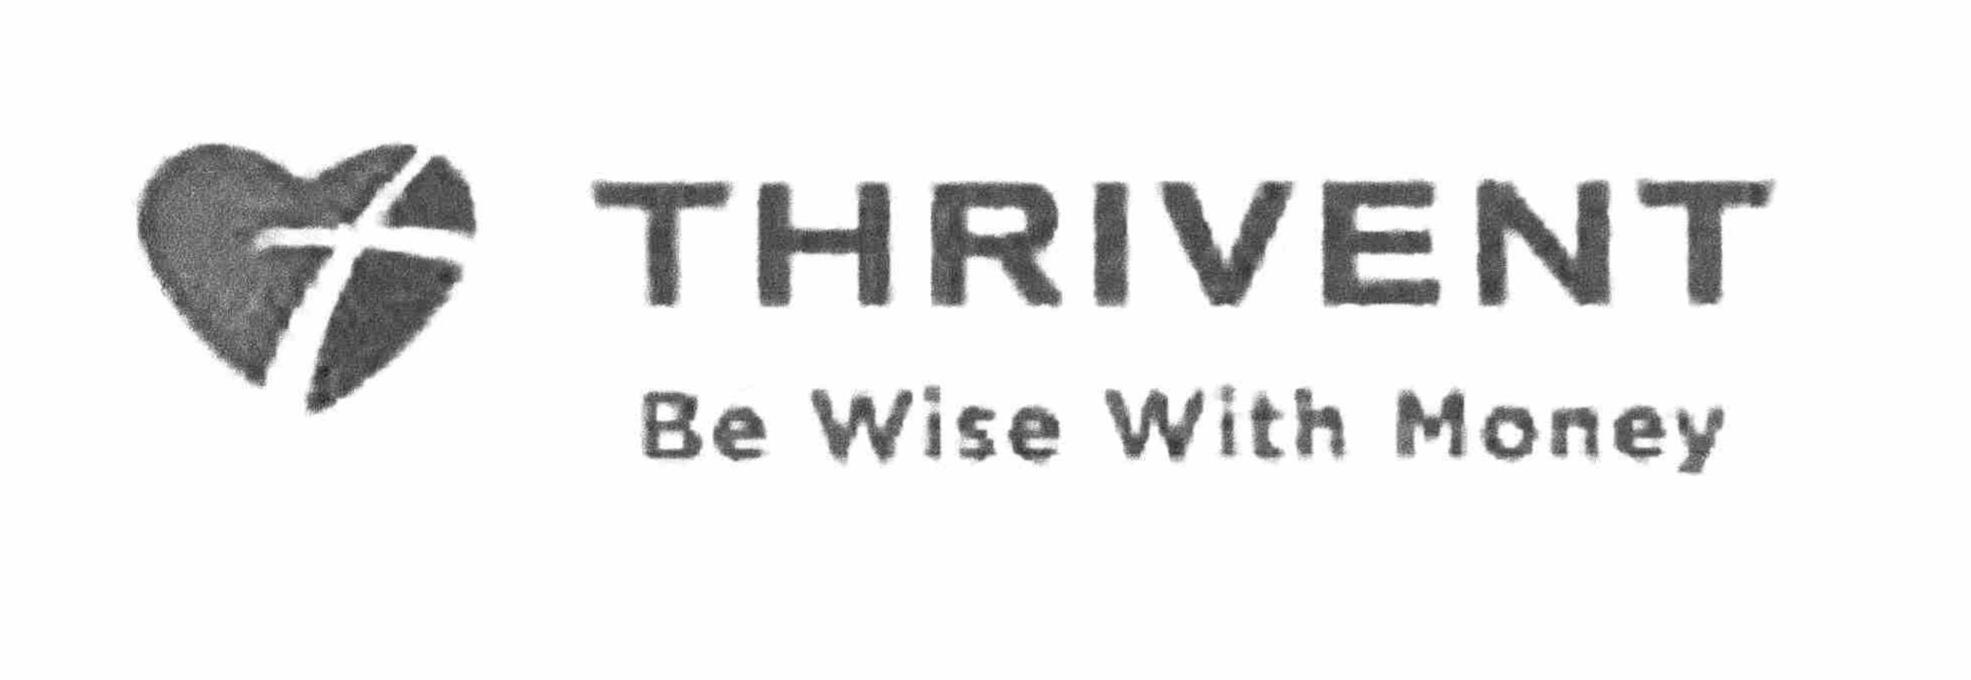  THRIVENT BE WISE WITH MONEY